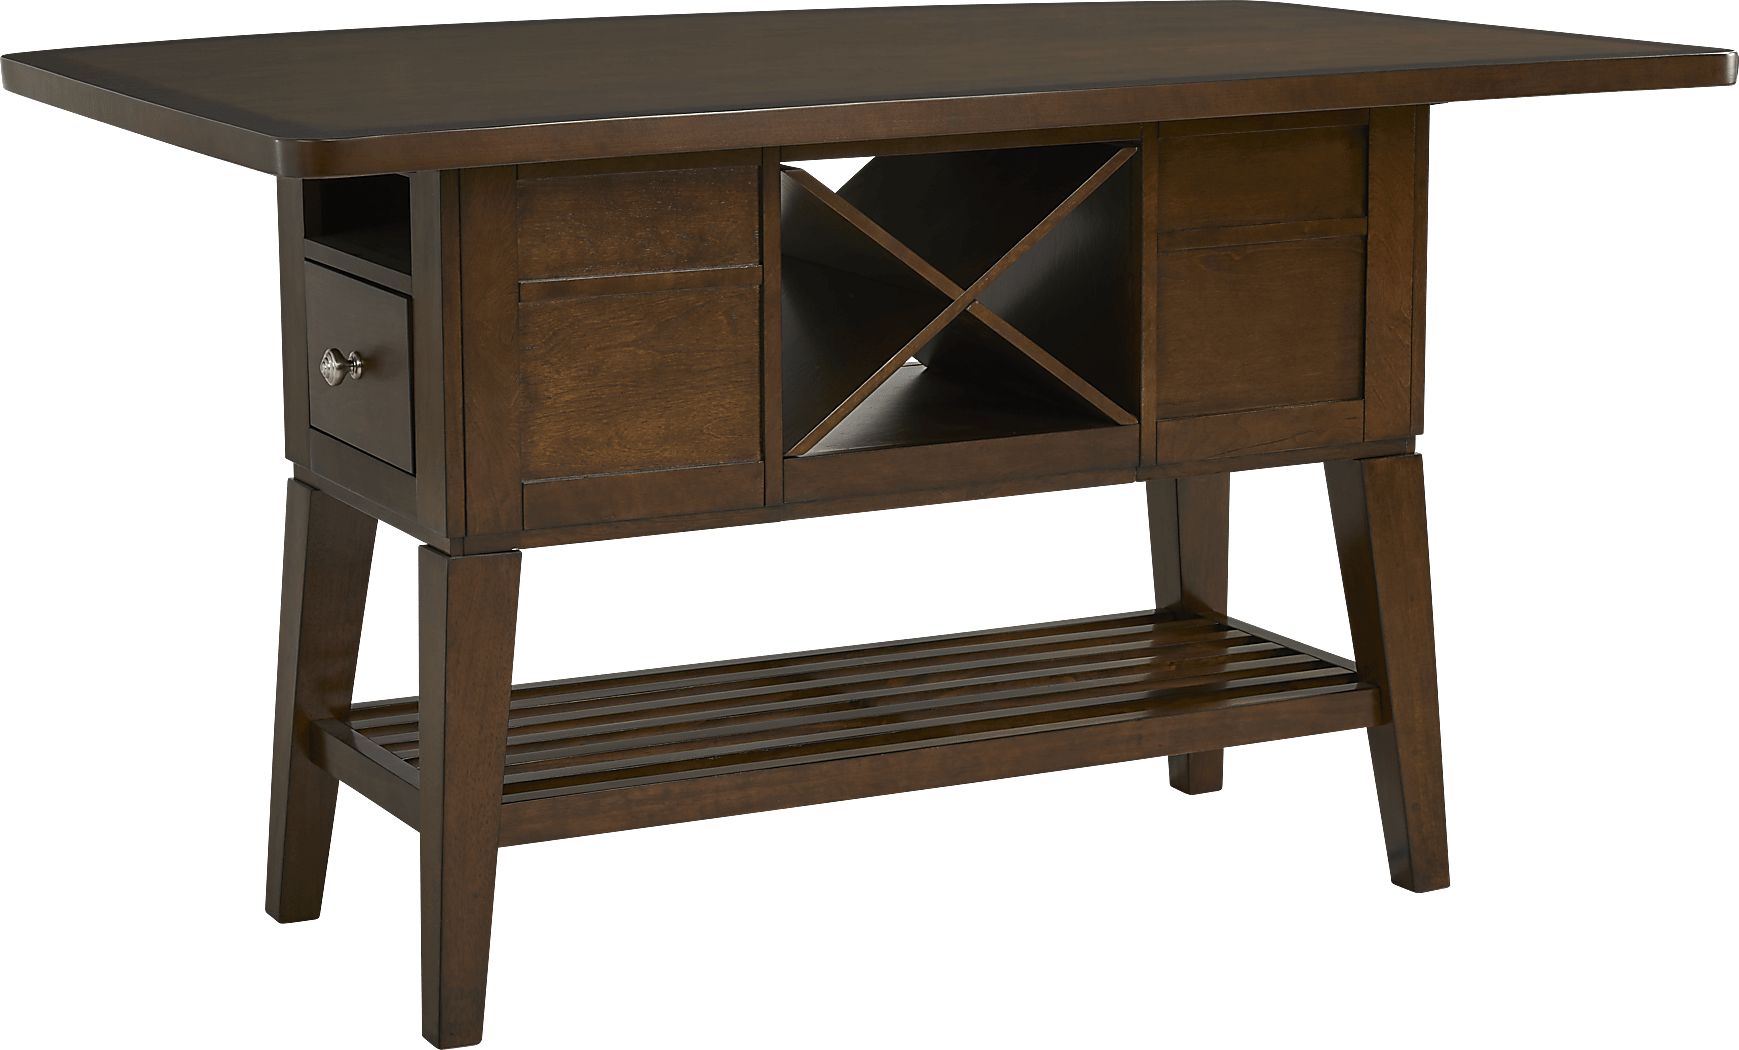 Walstead Place Brown 2 Pc Counter Height Table 4328856P Dim Image?cache Id=88b21a2826a88fad2925fcbc47ff0c59